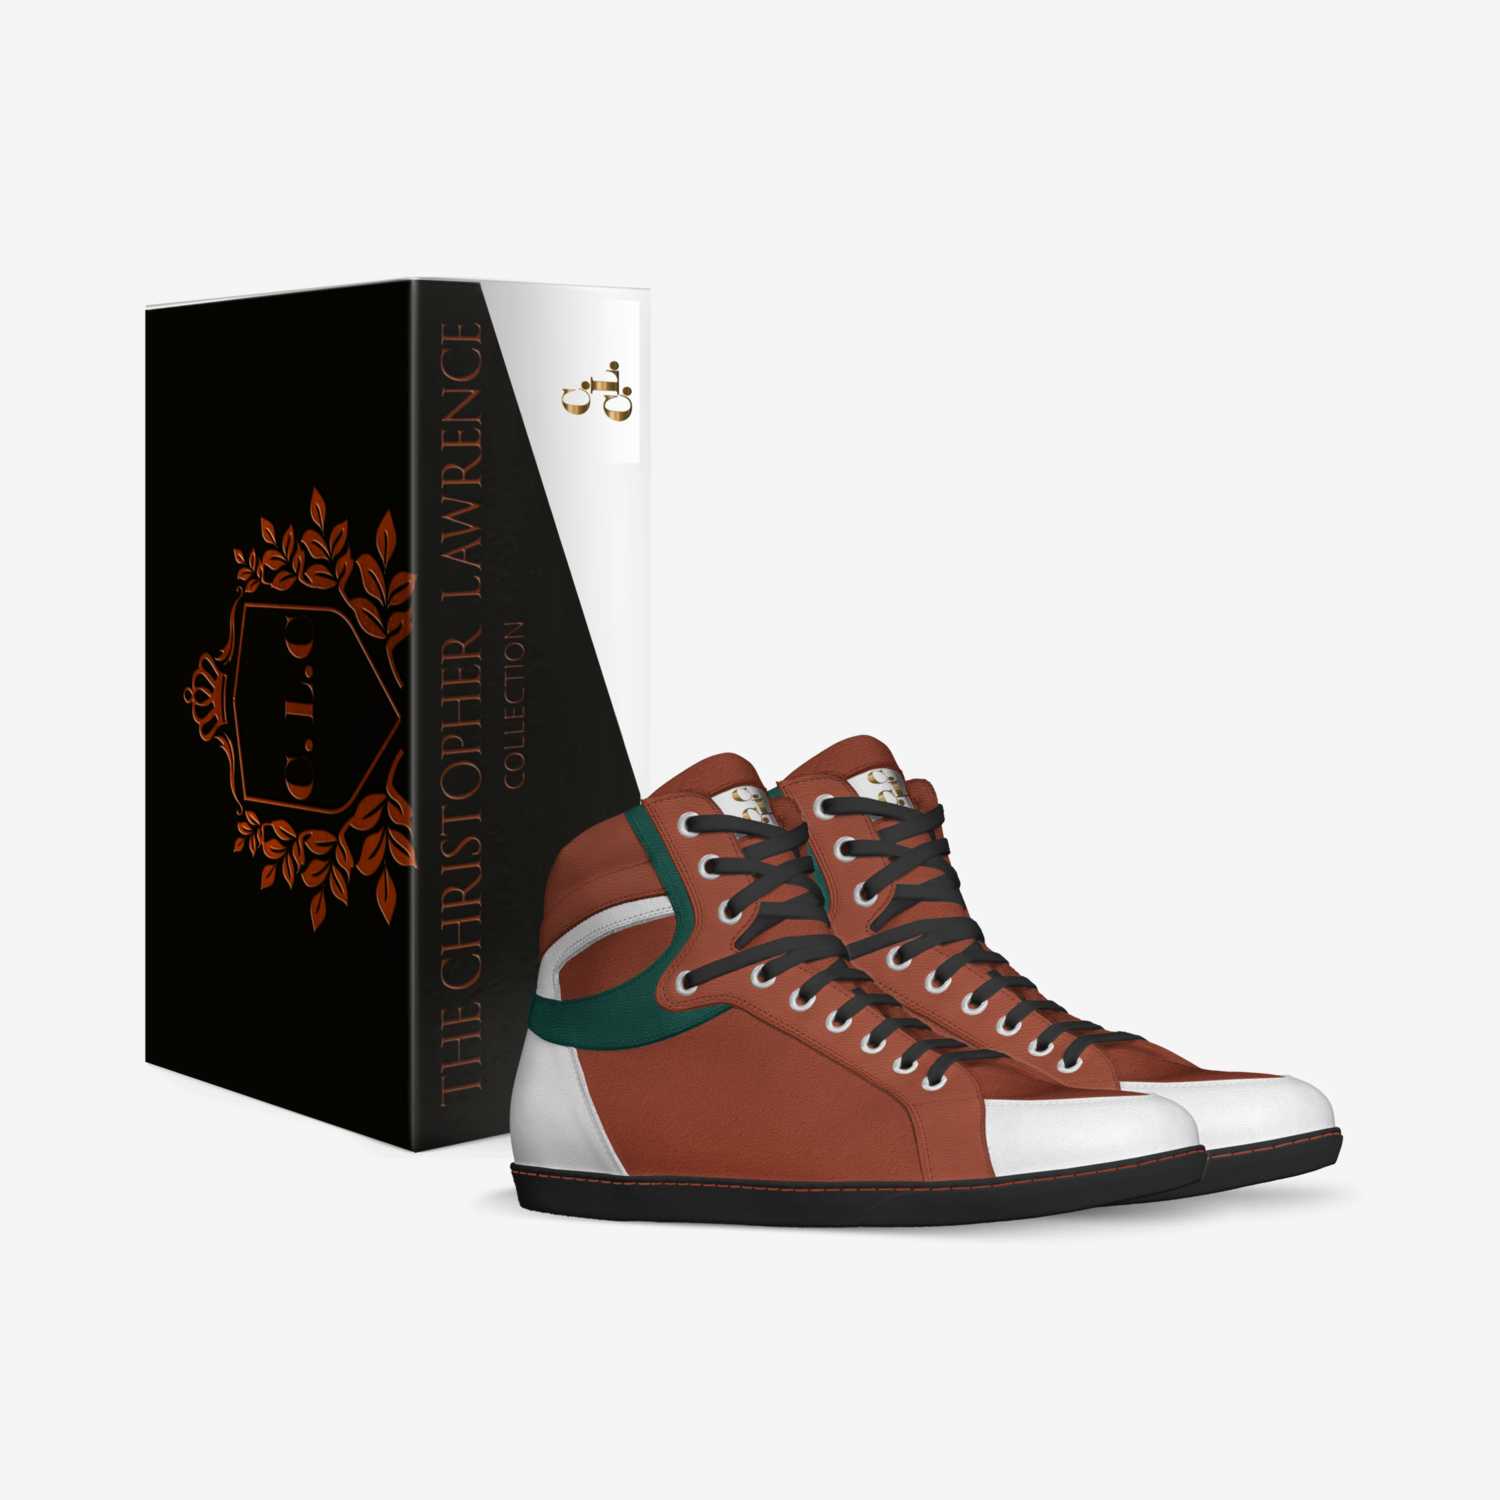 Chilled custom made in Italy shoes by Christopher Lawrence | Box view